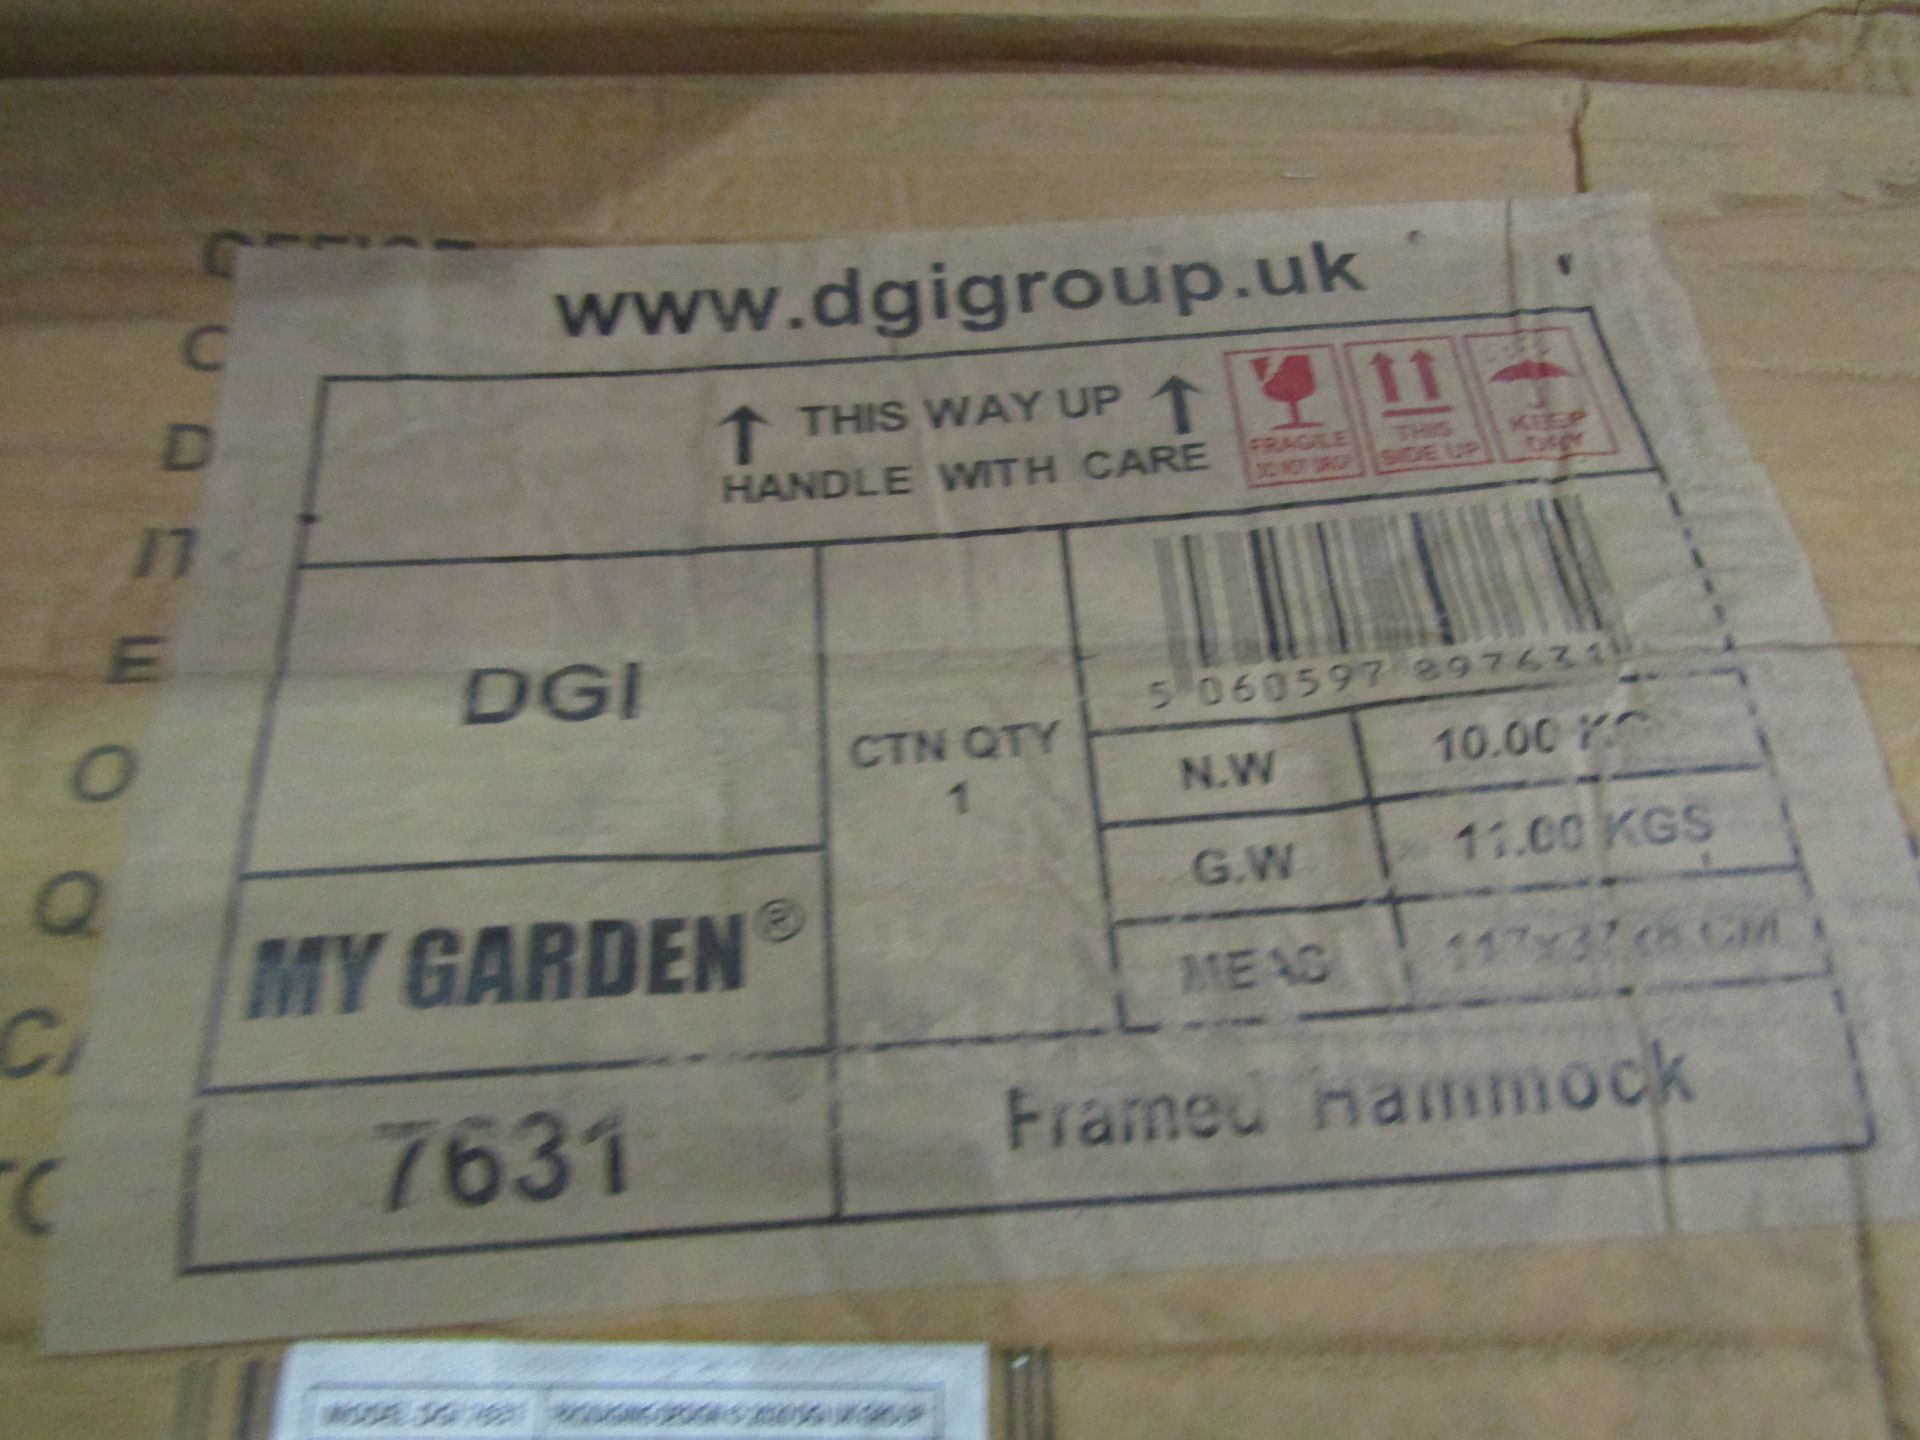 My Garden Framed Hammock, 117x37x8cm, Unchecked & Boxed, Viewing Is Advised.